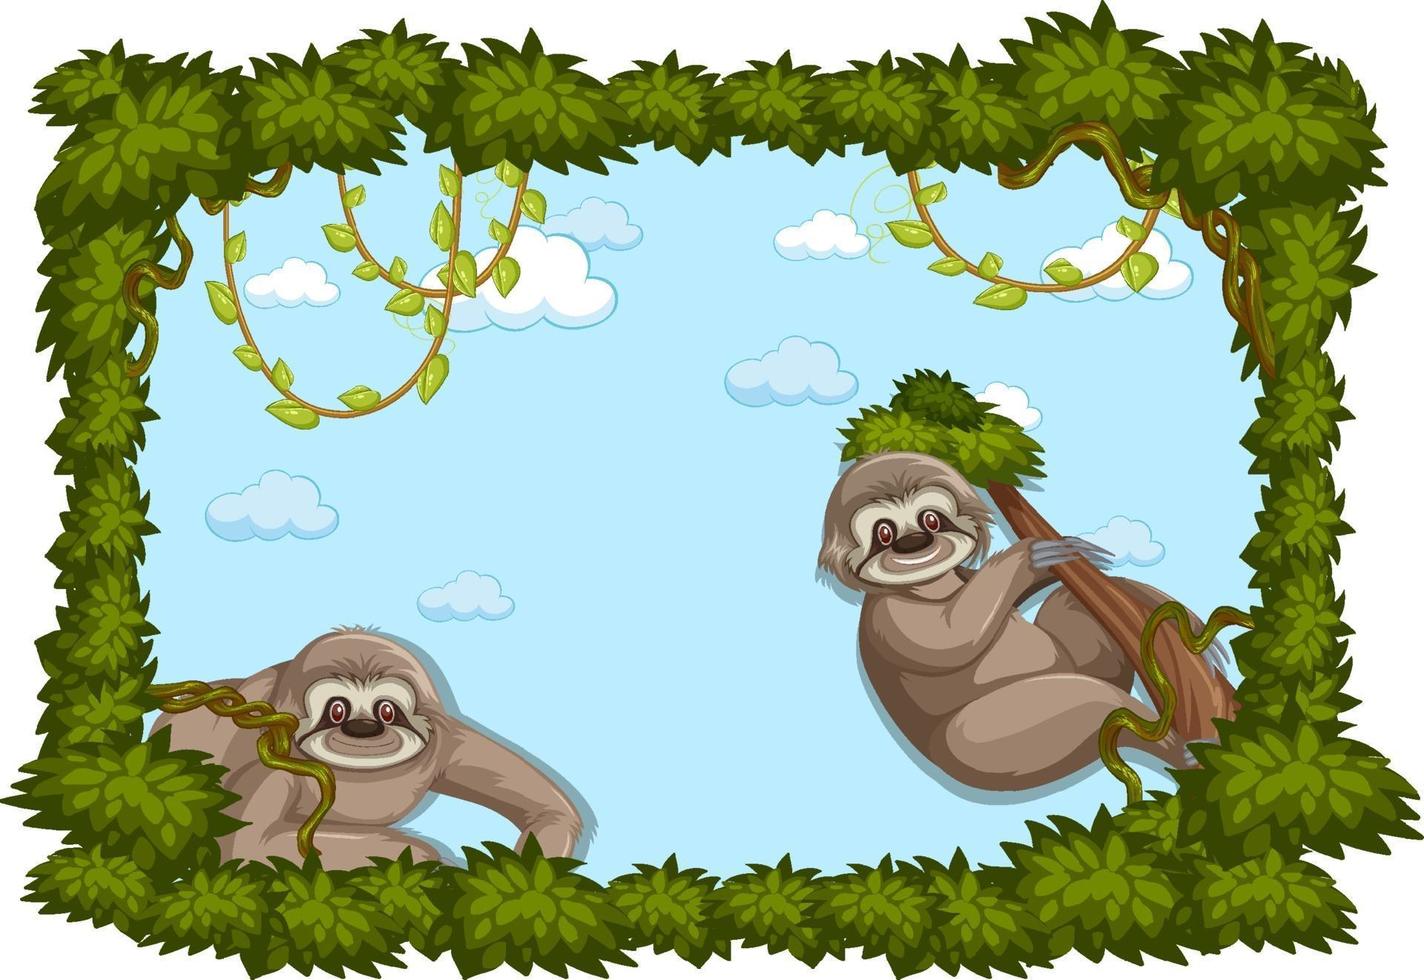 Empty banner with leaves frame and sloth cartoon character vector